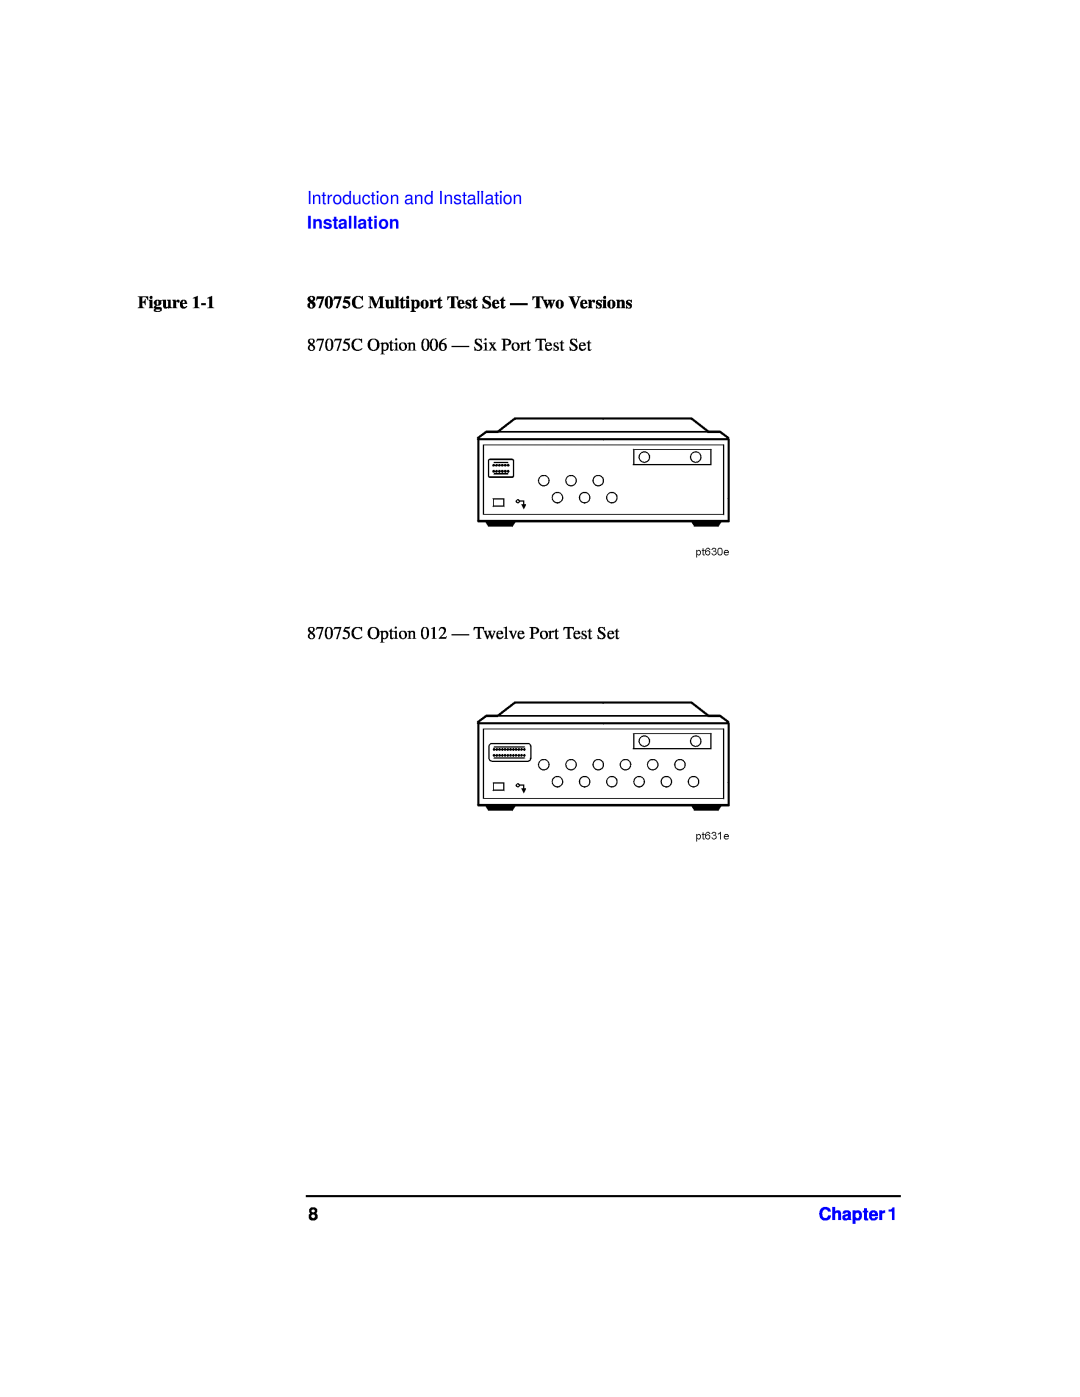 Agilent Technologies manual Introduction and Installation, 87075C Multiport Test Set - Two Versions, Chapter 